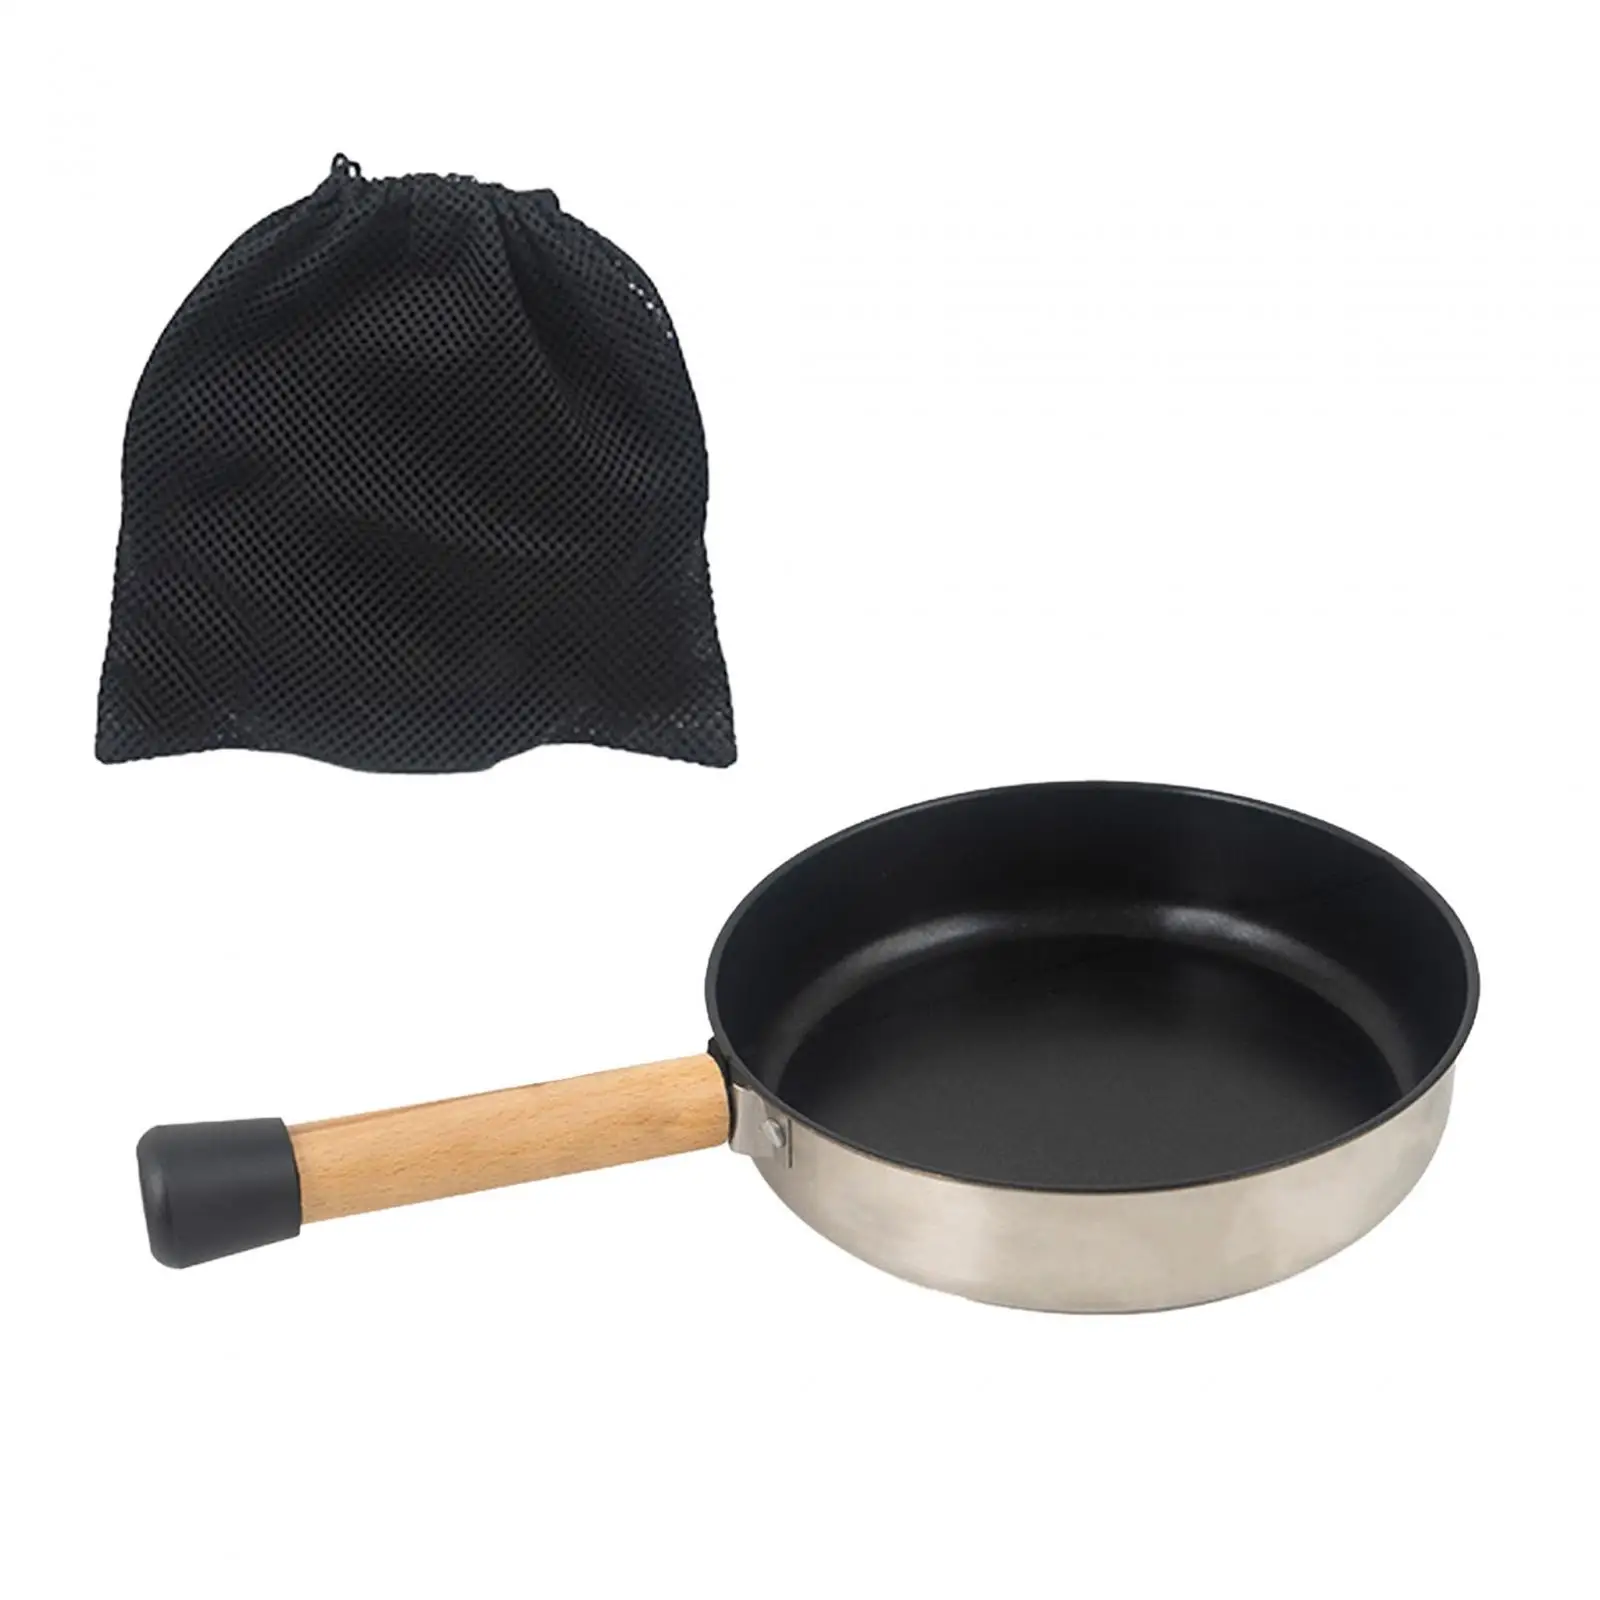 Nonstick Frying Pan with Wooden Handle, Flat Griddle Pan, Camping Fry Pan for